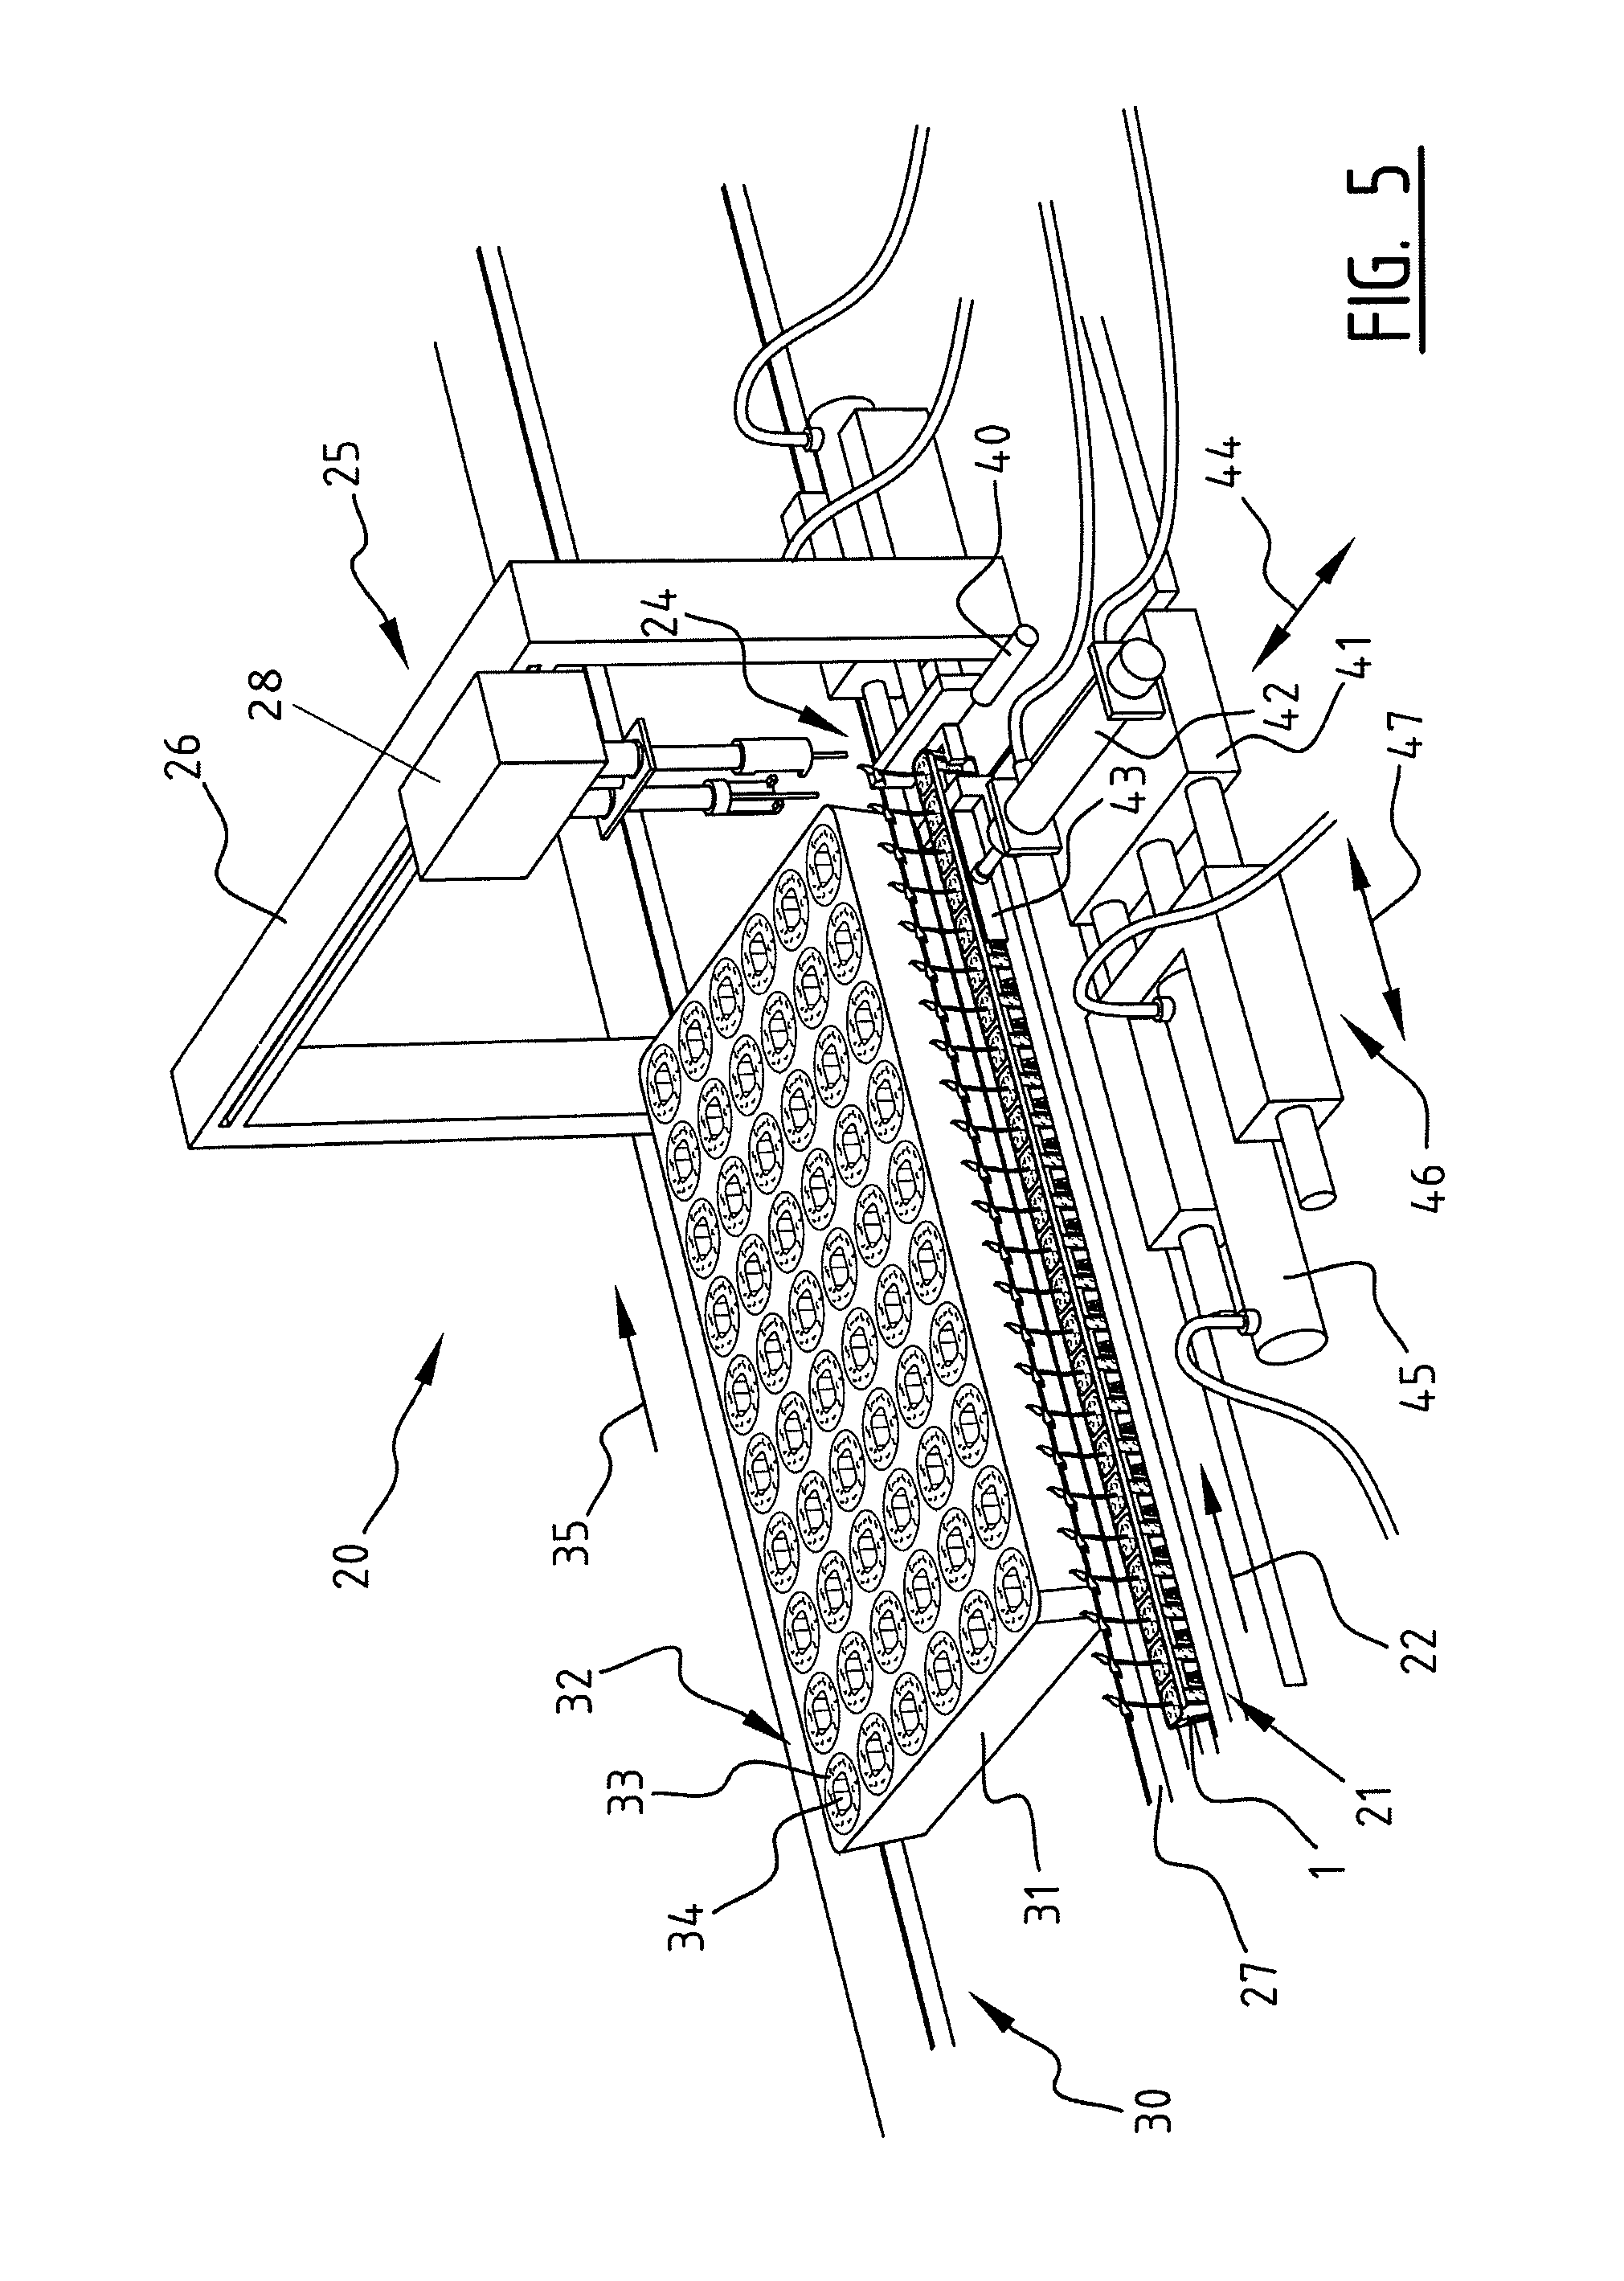 System and method for transferring and singularizing plant material in a container, container for plant material, use of a container for plant material